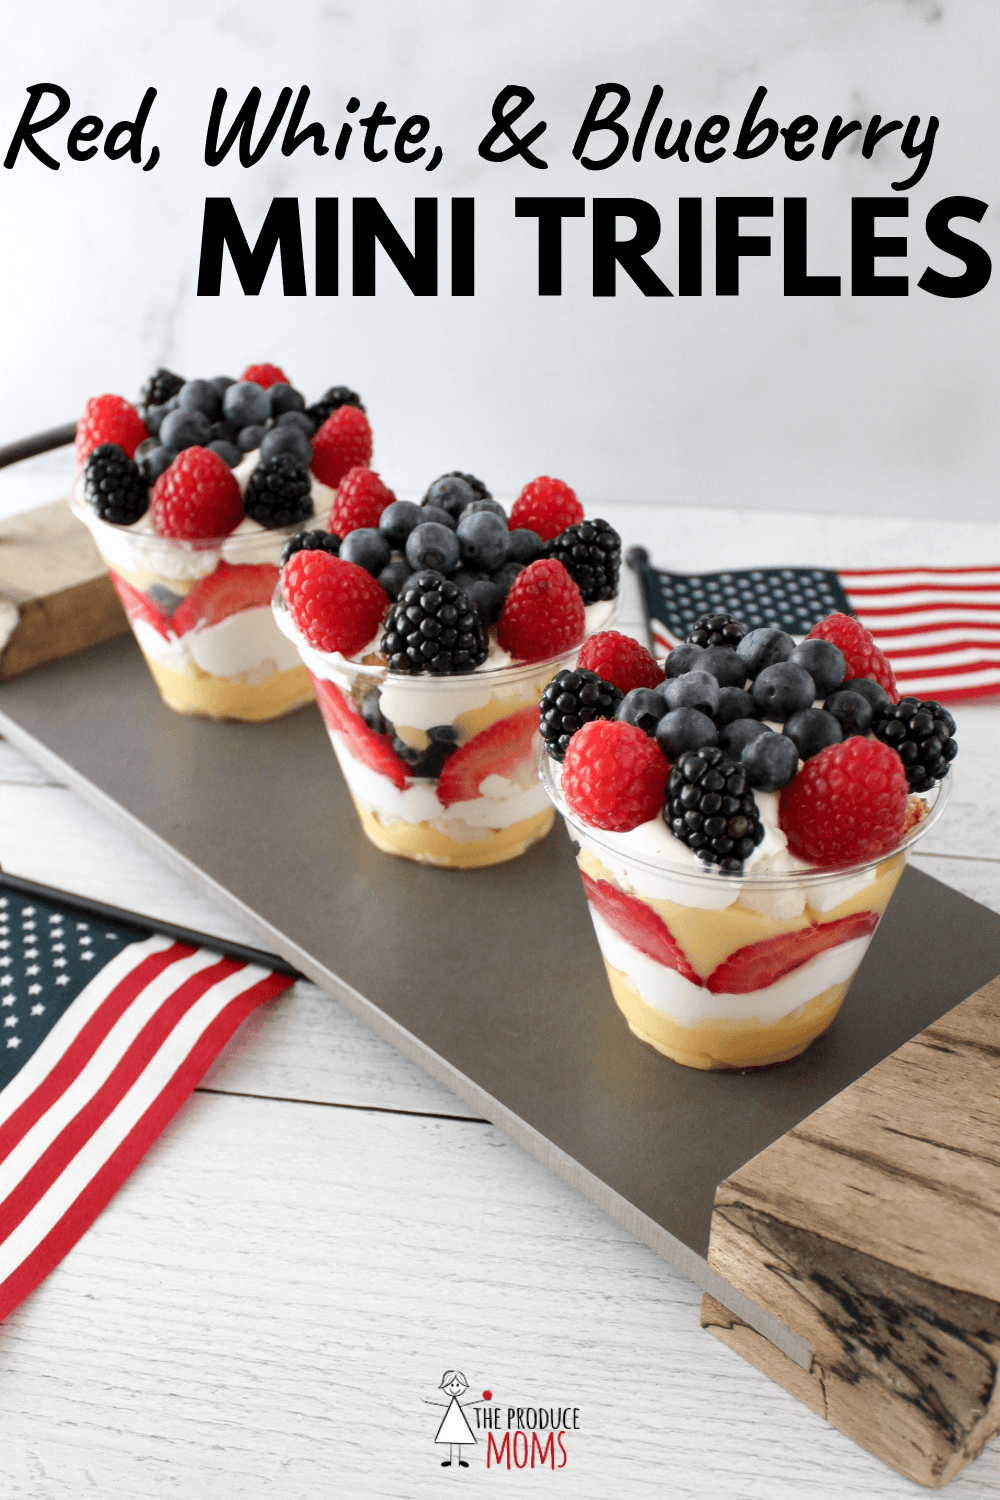 Red, White, and Blueberry Mini Trifles | Patriotic July 4th Dessert